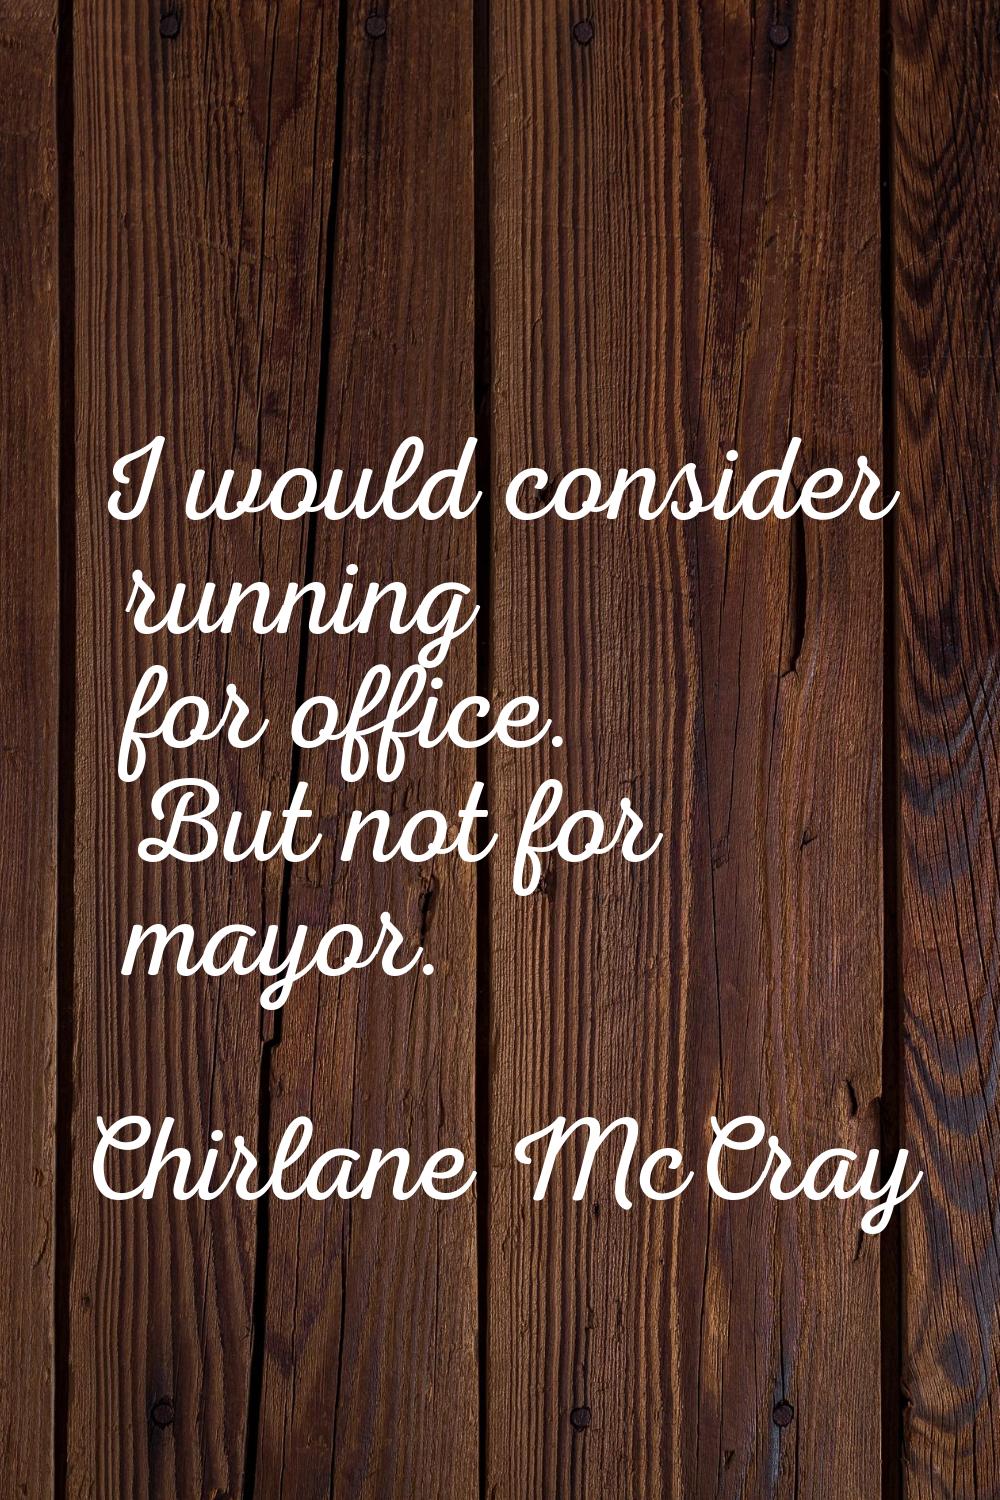 I would consider running for office. But not for mayor.